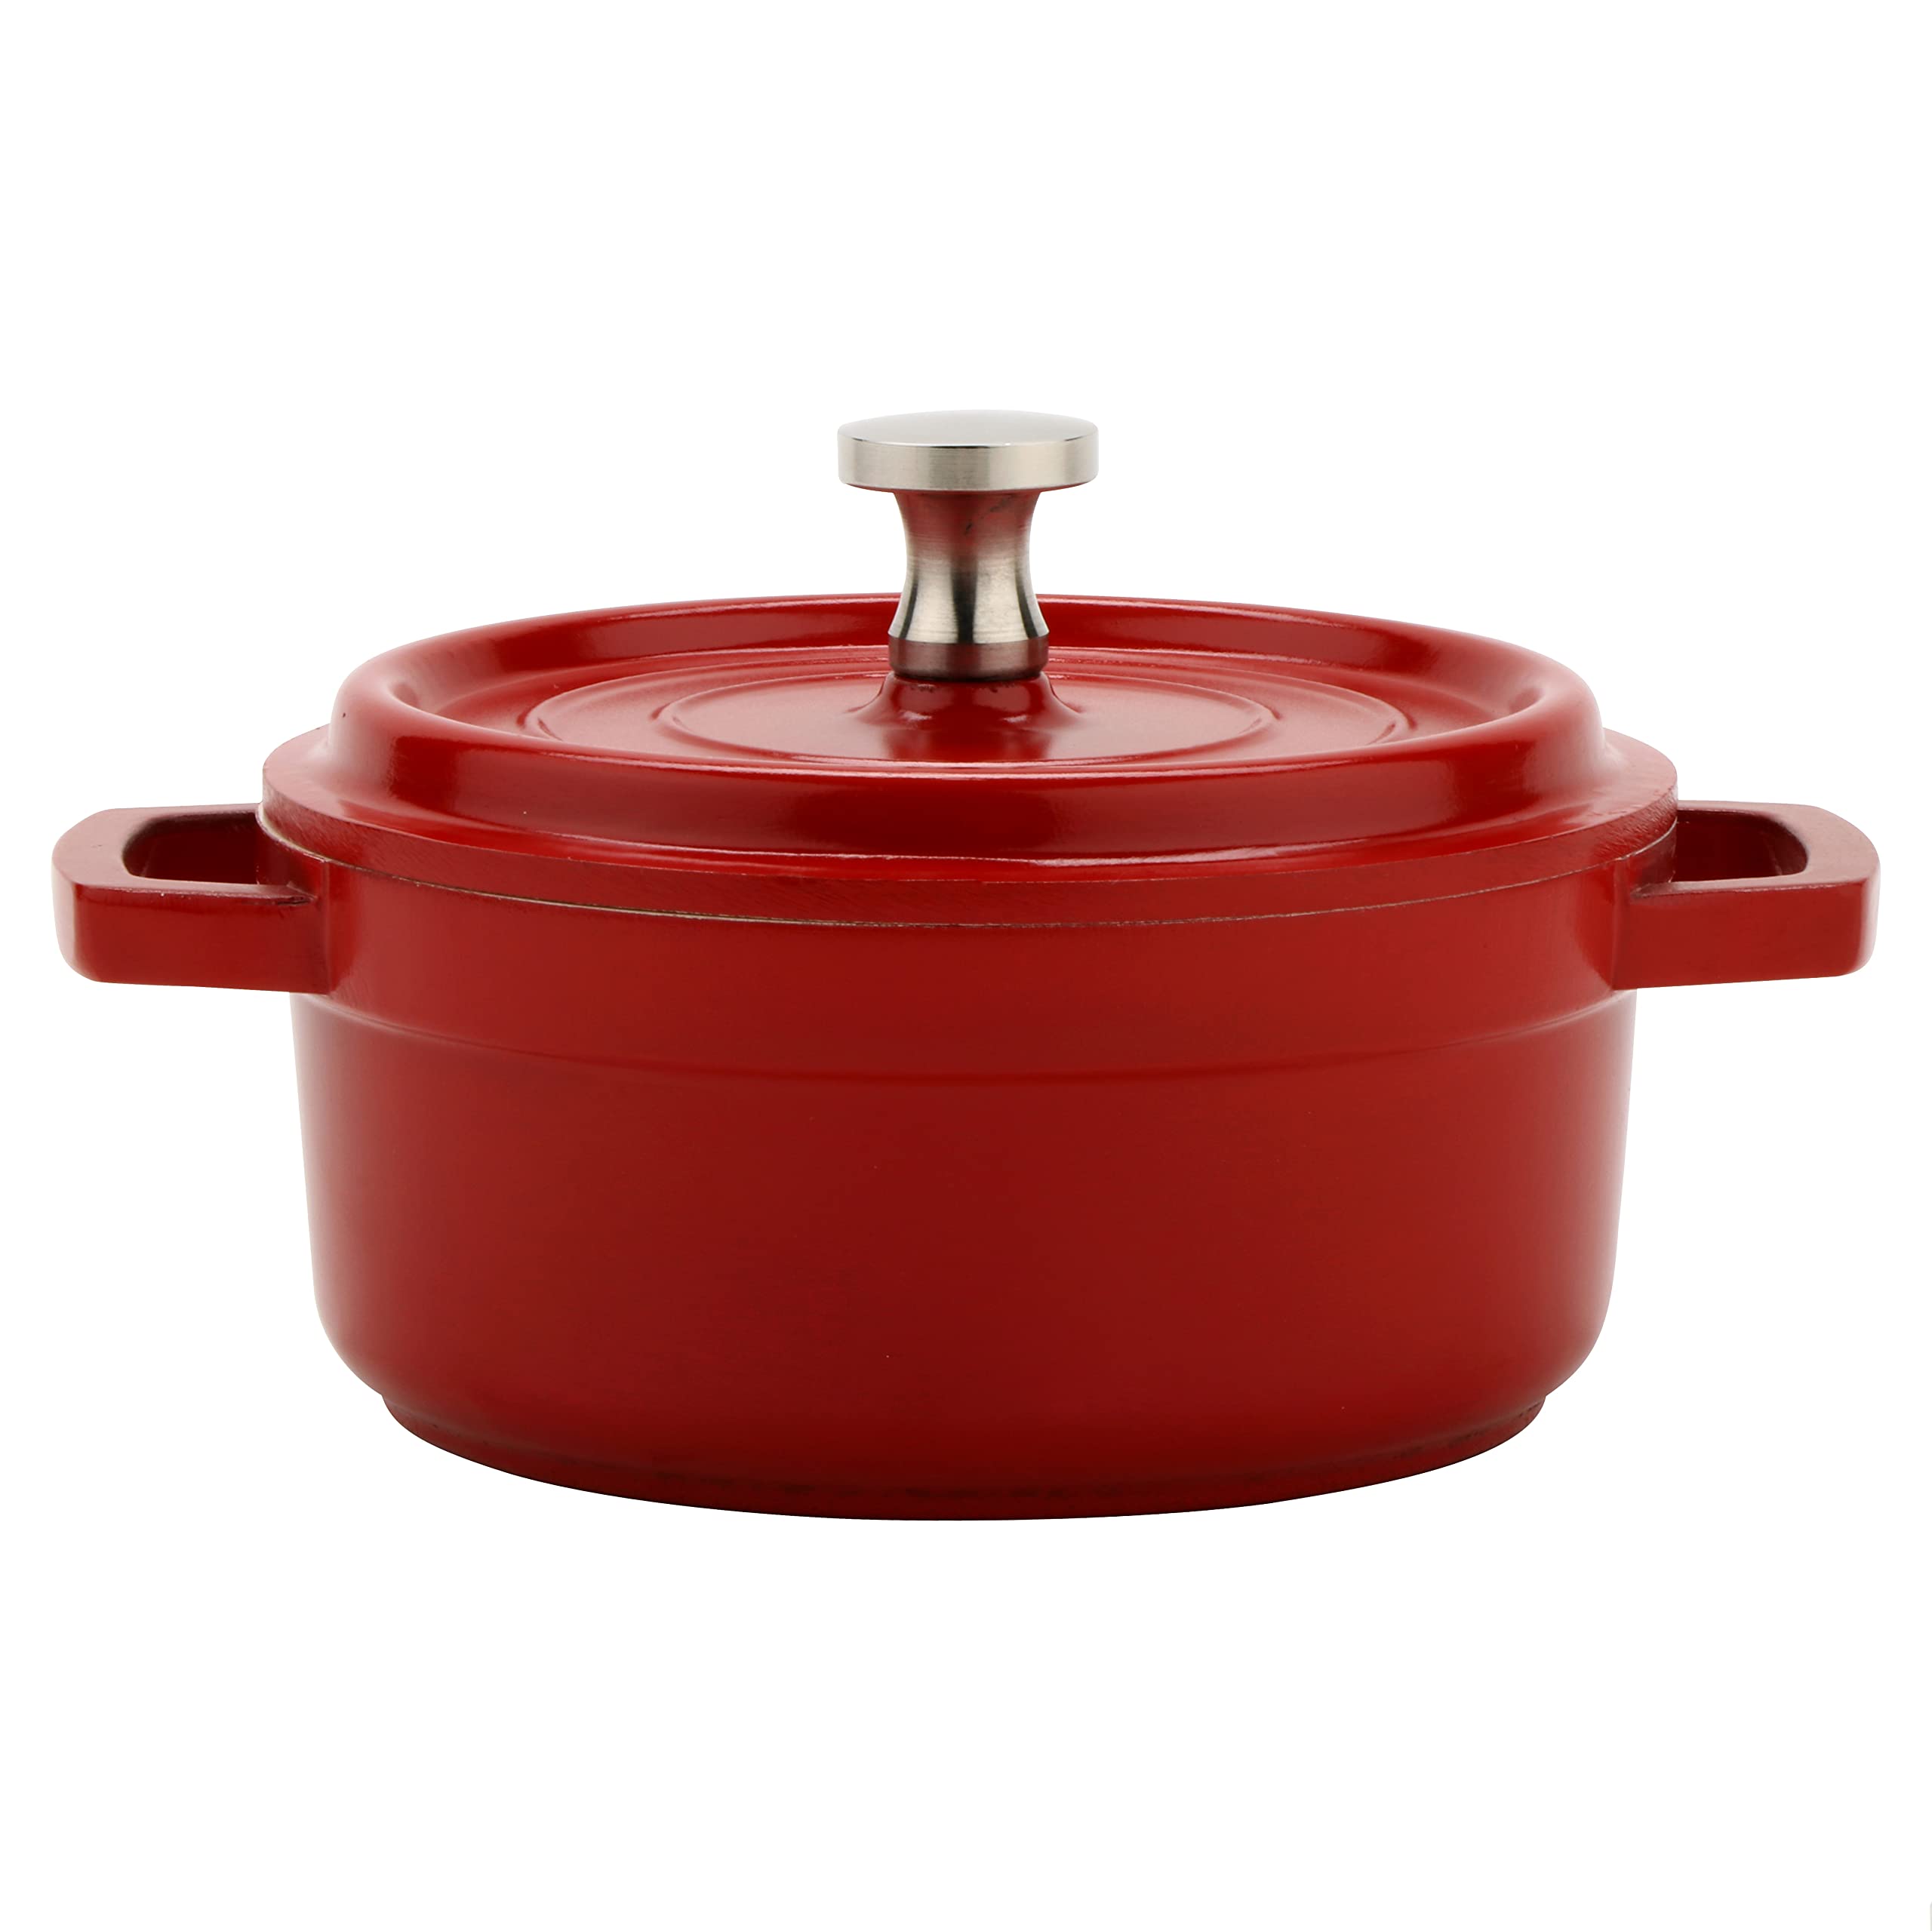 G.E.T. CA-002-RW/CC Heiss® Energy-Efficient Cast Aluminum Mini Dutch Oven with Lid, 8 Ounce, Red/White